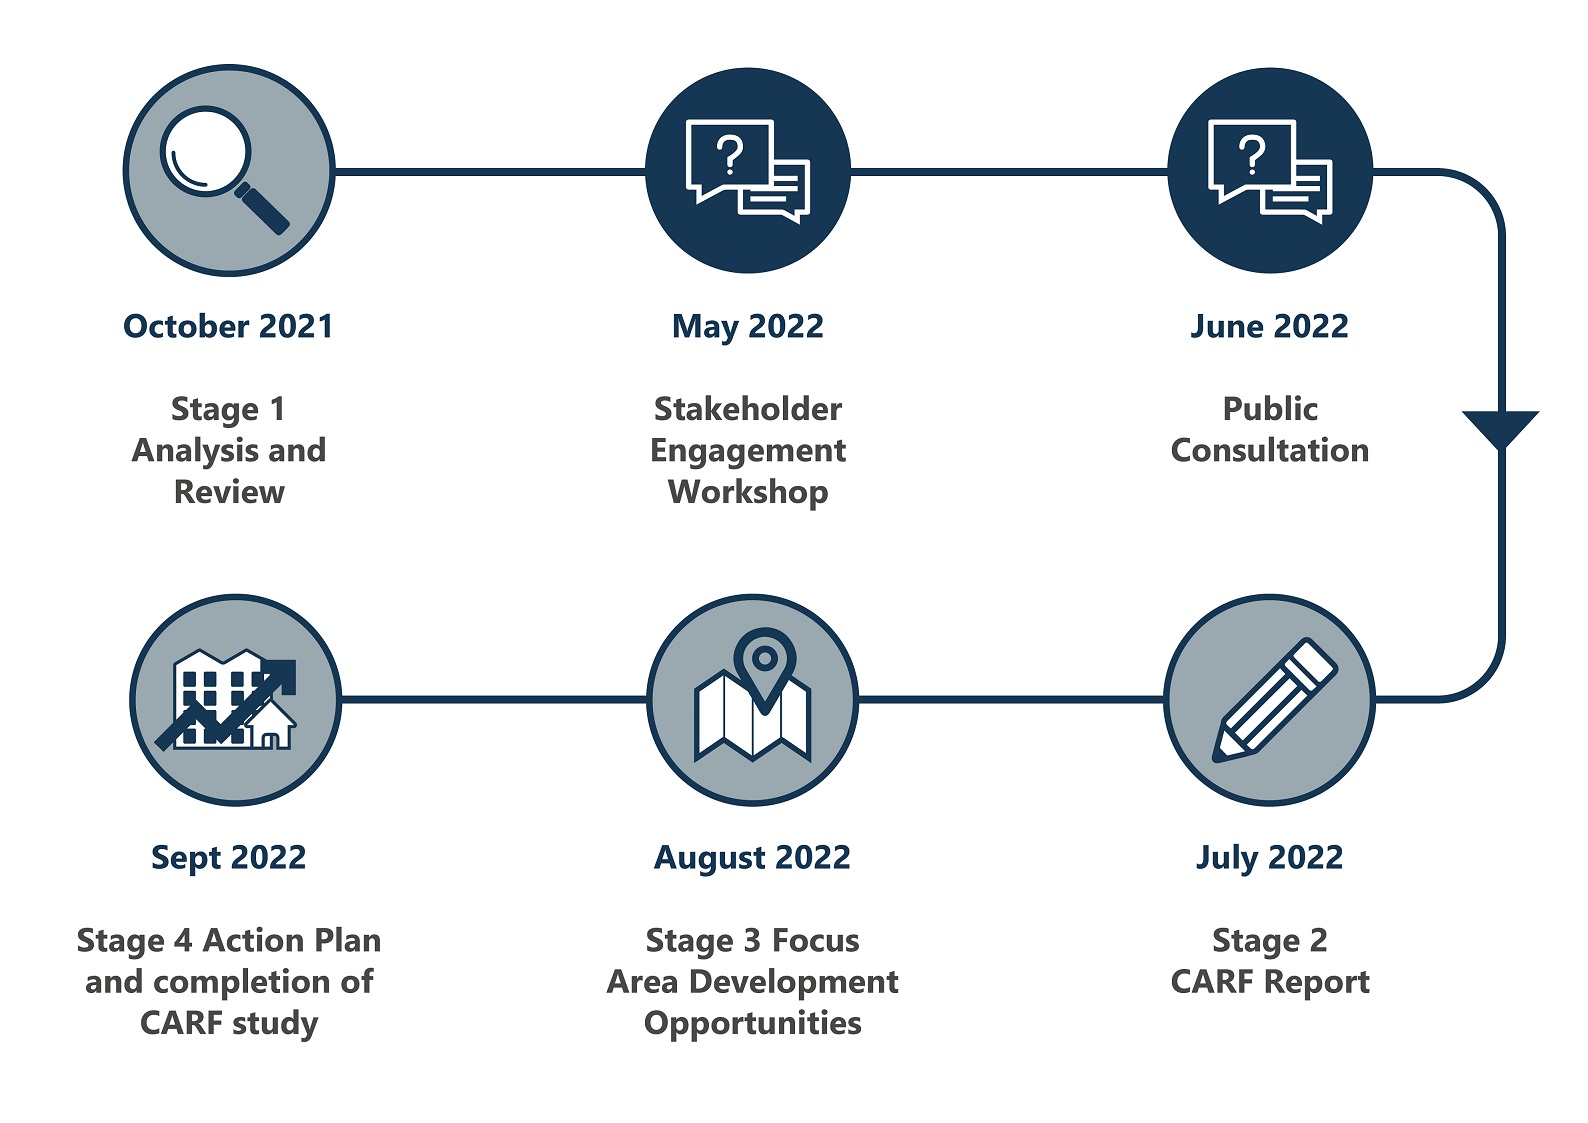 A timeline with infographics illustrating key dates for the submission of the CARF. They are as follows: October 2021, Stage 1 Analysis and Review. May 2022, Stakeholder Engagement Workshop. June 2022, Public Consultation Event. July 2022, Stage 2 CARF Report. August 2022, Stage 3 focus area development opportunities. September 2022, Stage 4 Action Plan and Completion of the CARF study.